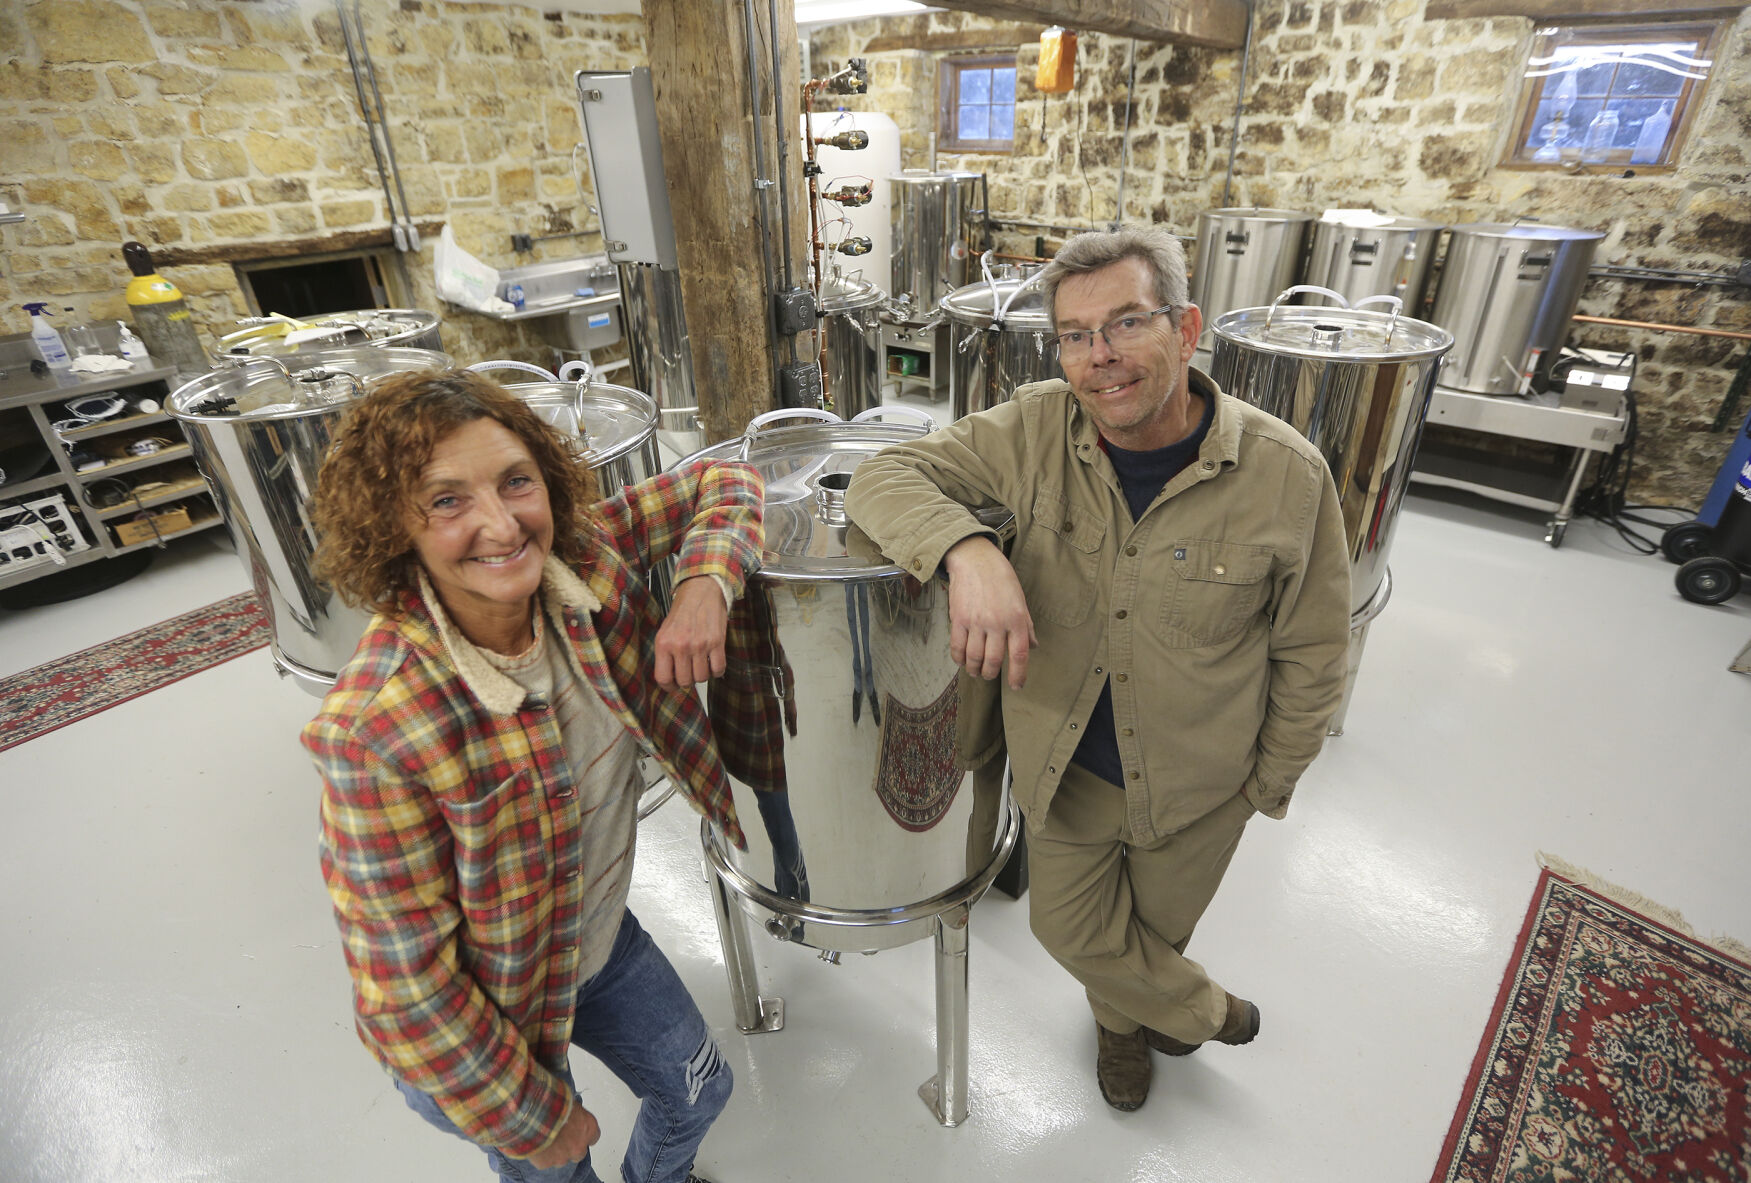 Don and Kari Vize, will be opening Beer in the Barn Brewery at the Gehlen House Inn and Barn, which the couple own in St. Donatus, Iowa. They hope to start serving their own beer in the barn in March once they reopen for the season.    PHOTO CREDIT: Dave Kettering